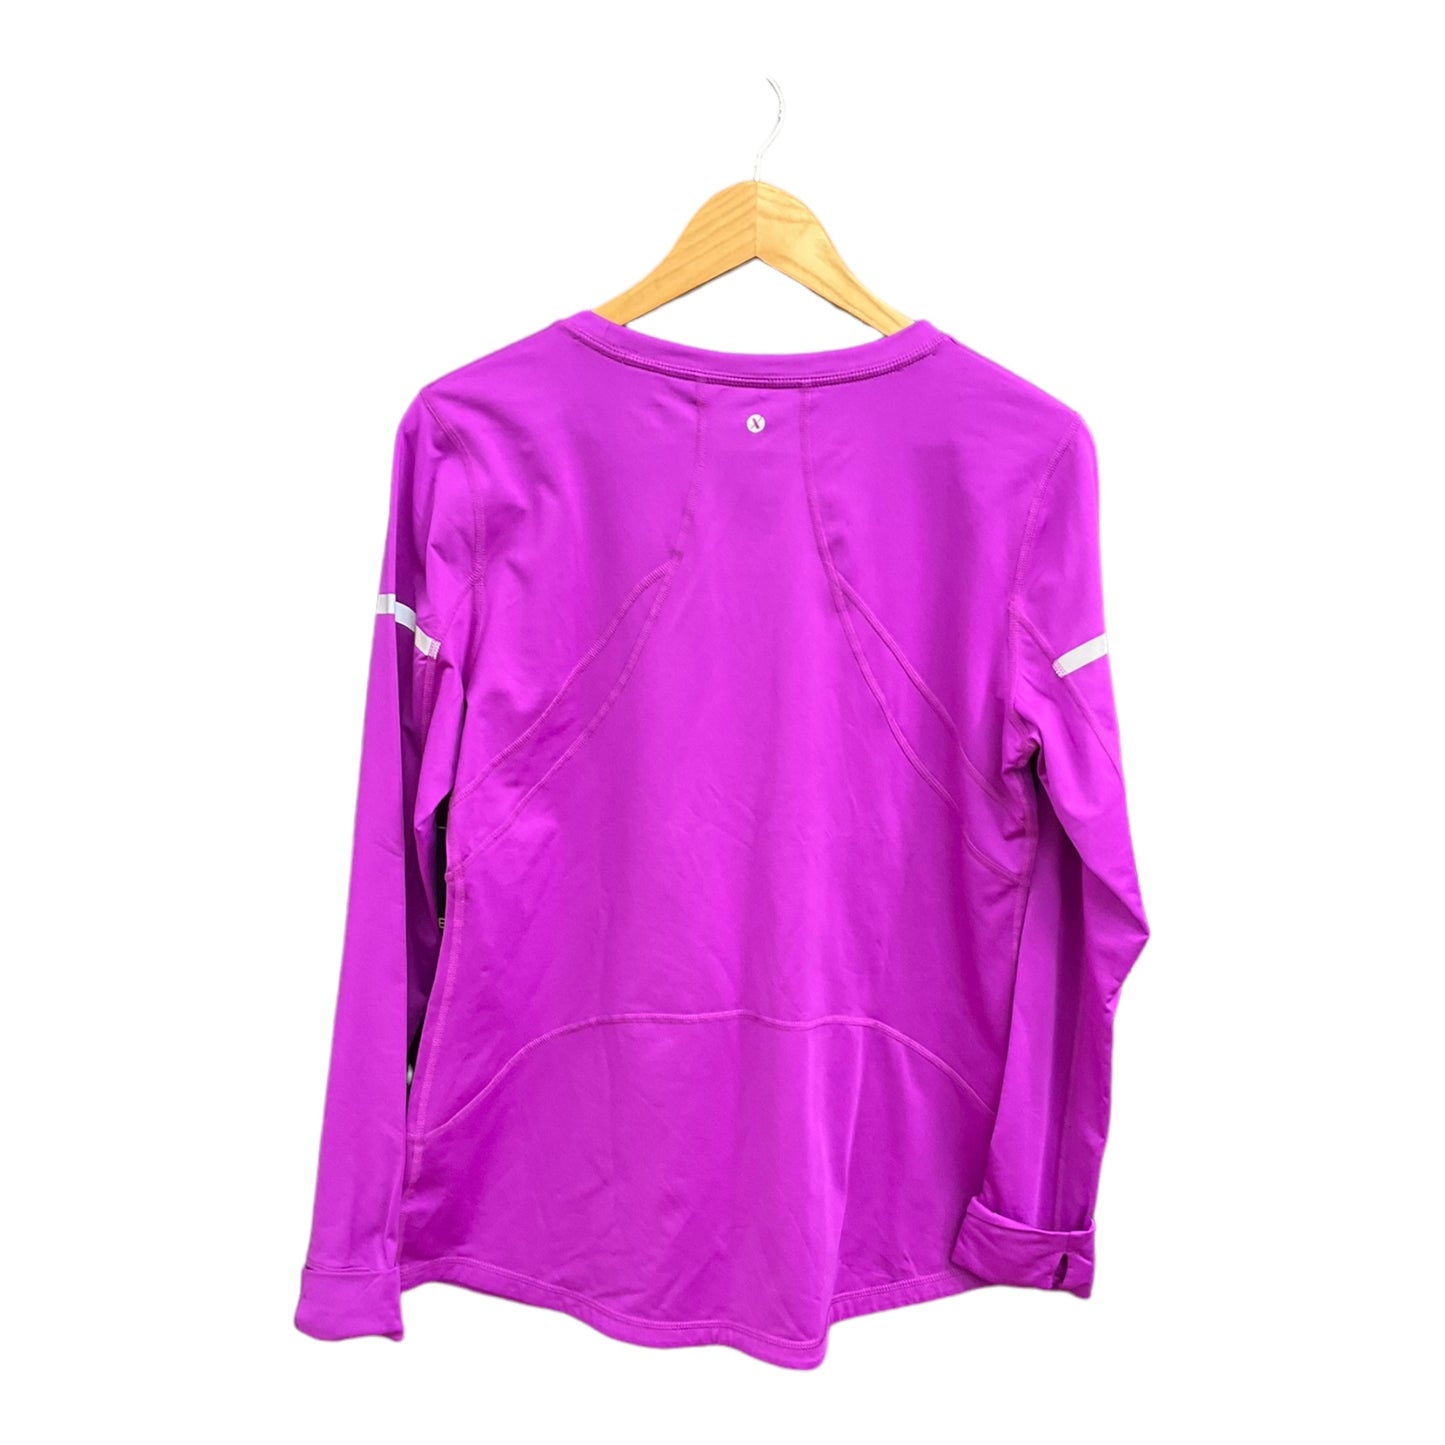 Athletic Top Long Sleeve Crewneck By Xersion  Size: L